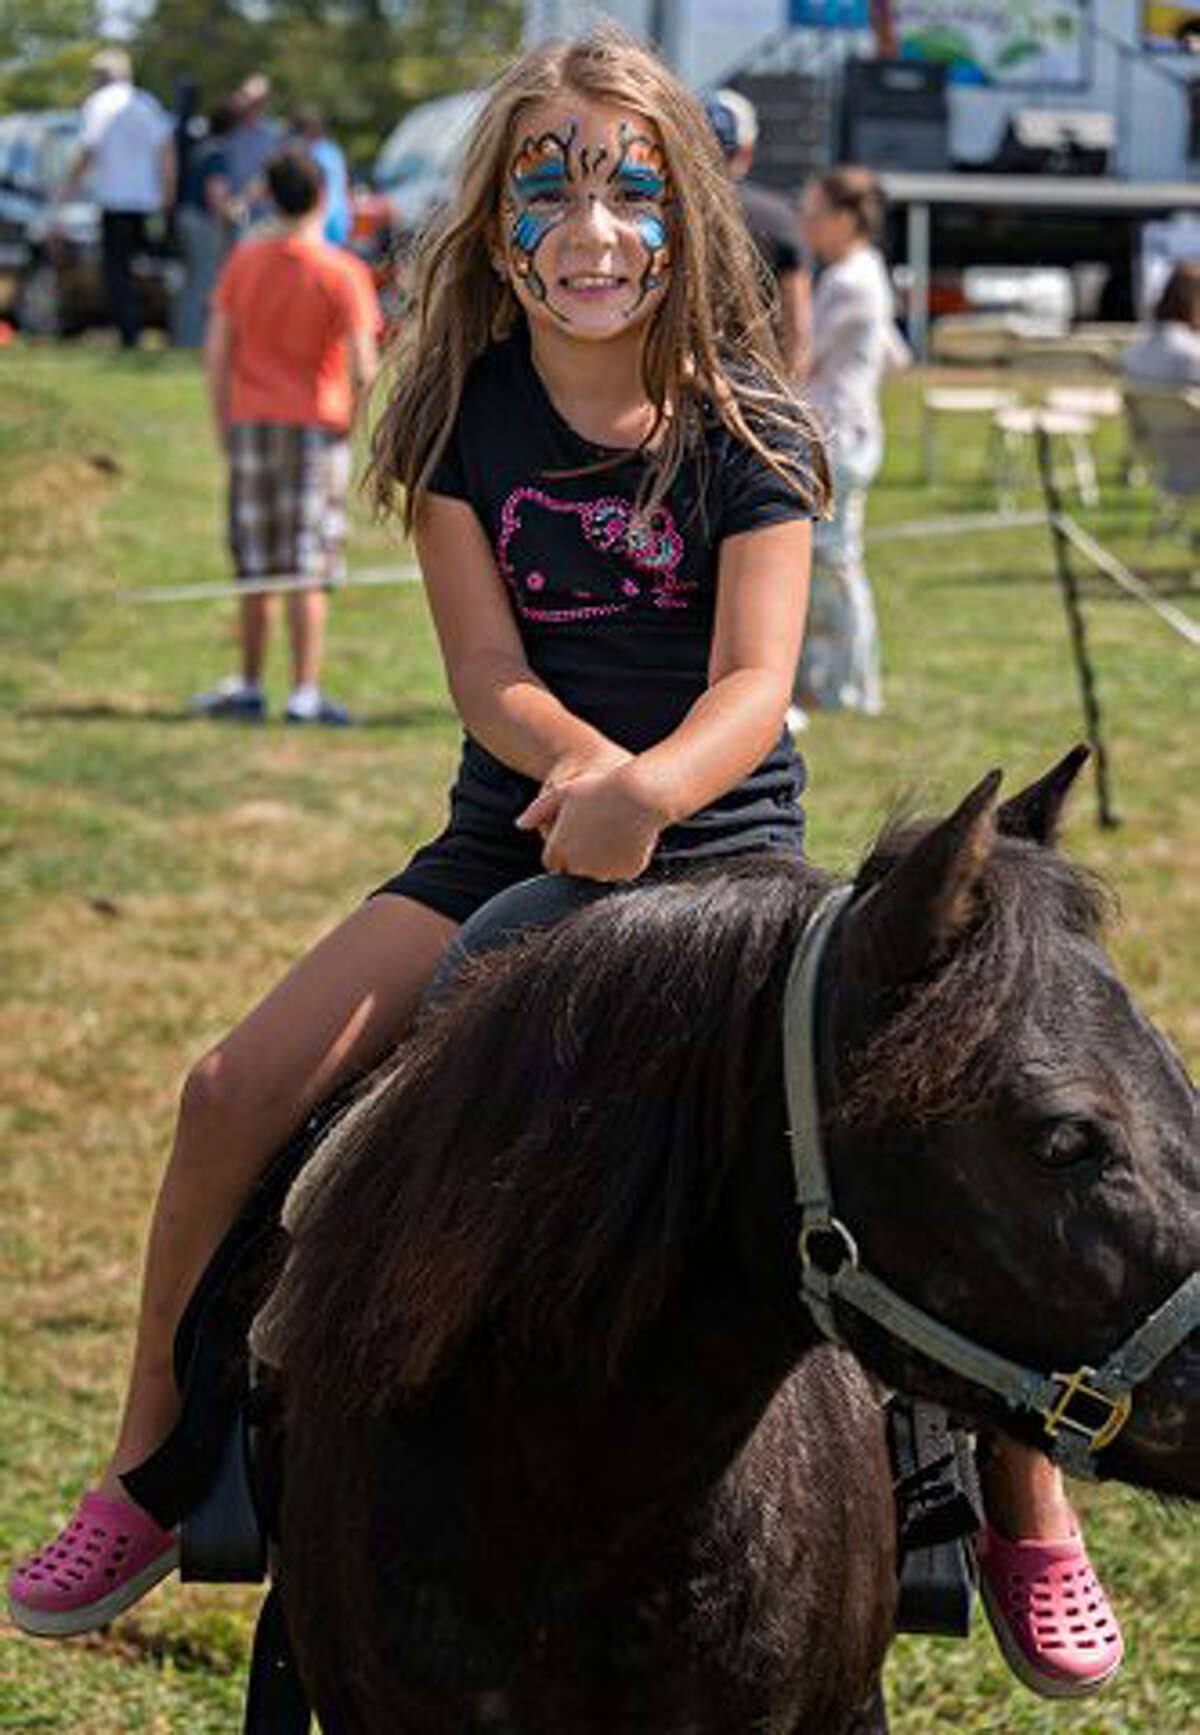 Pony rides will be among the many activities offered at the Live Green Connecticut! festival in Norwalk, Conn., on Saturday and Sunday, Sept. 14 to 15, 2013. Admission is $5 per car. Food and items will be available for purchase, too. For more information, visit http://livegreenct.com.